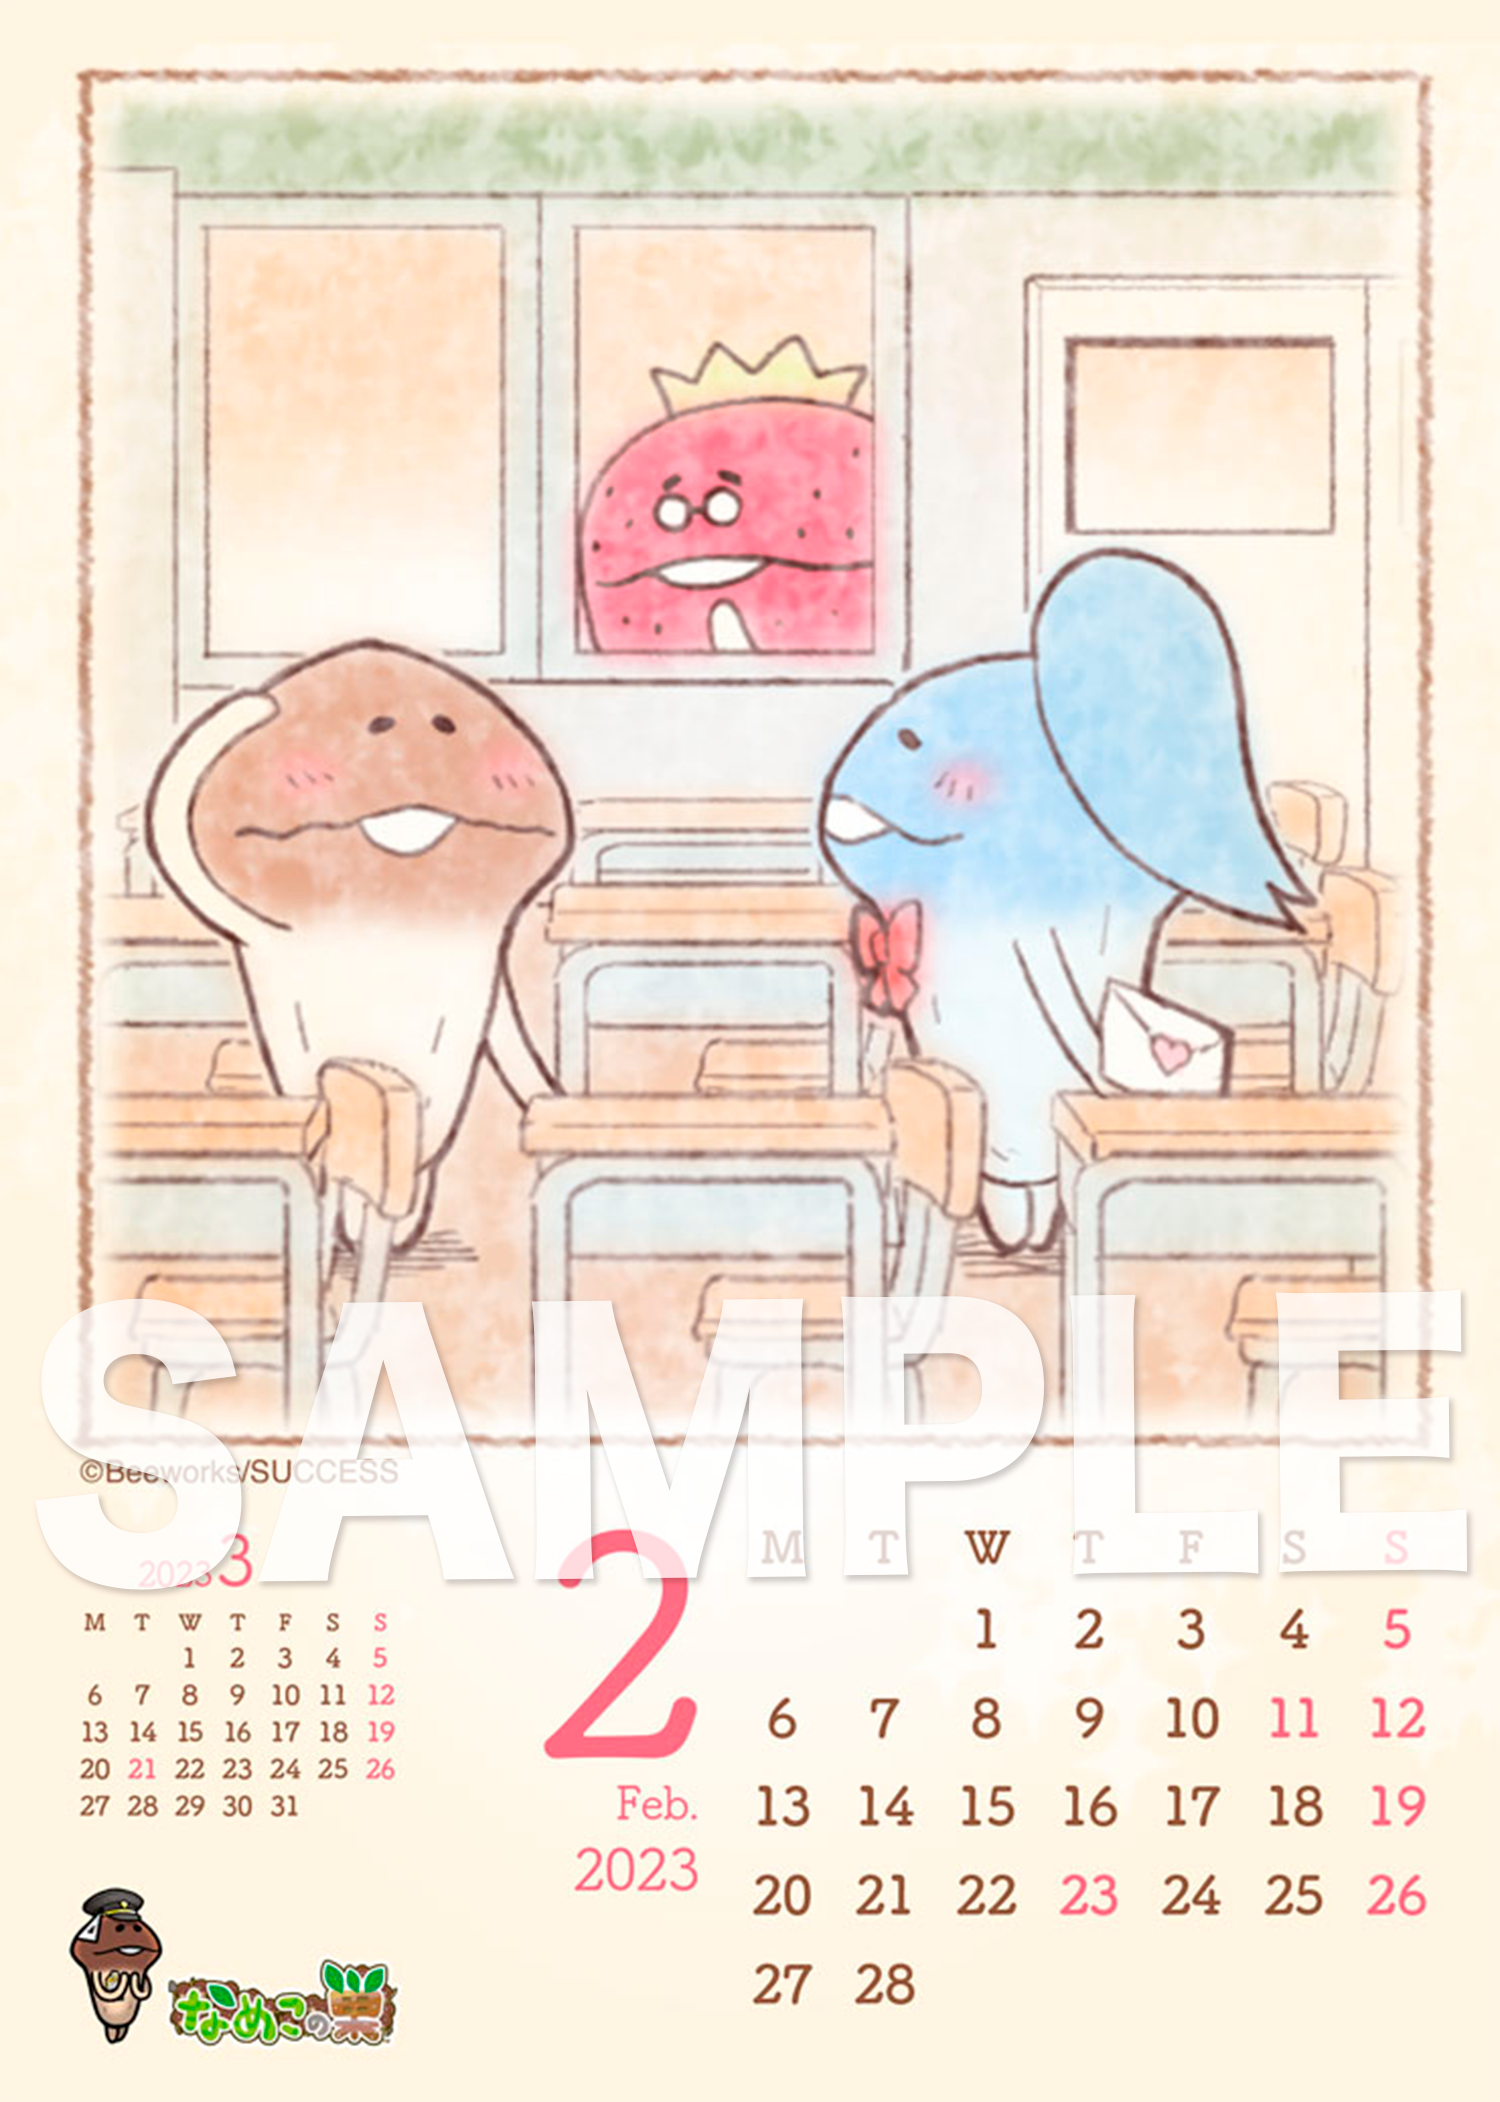 nameko_fancolle_2302_low.png